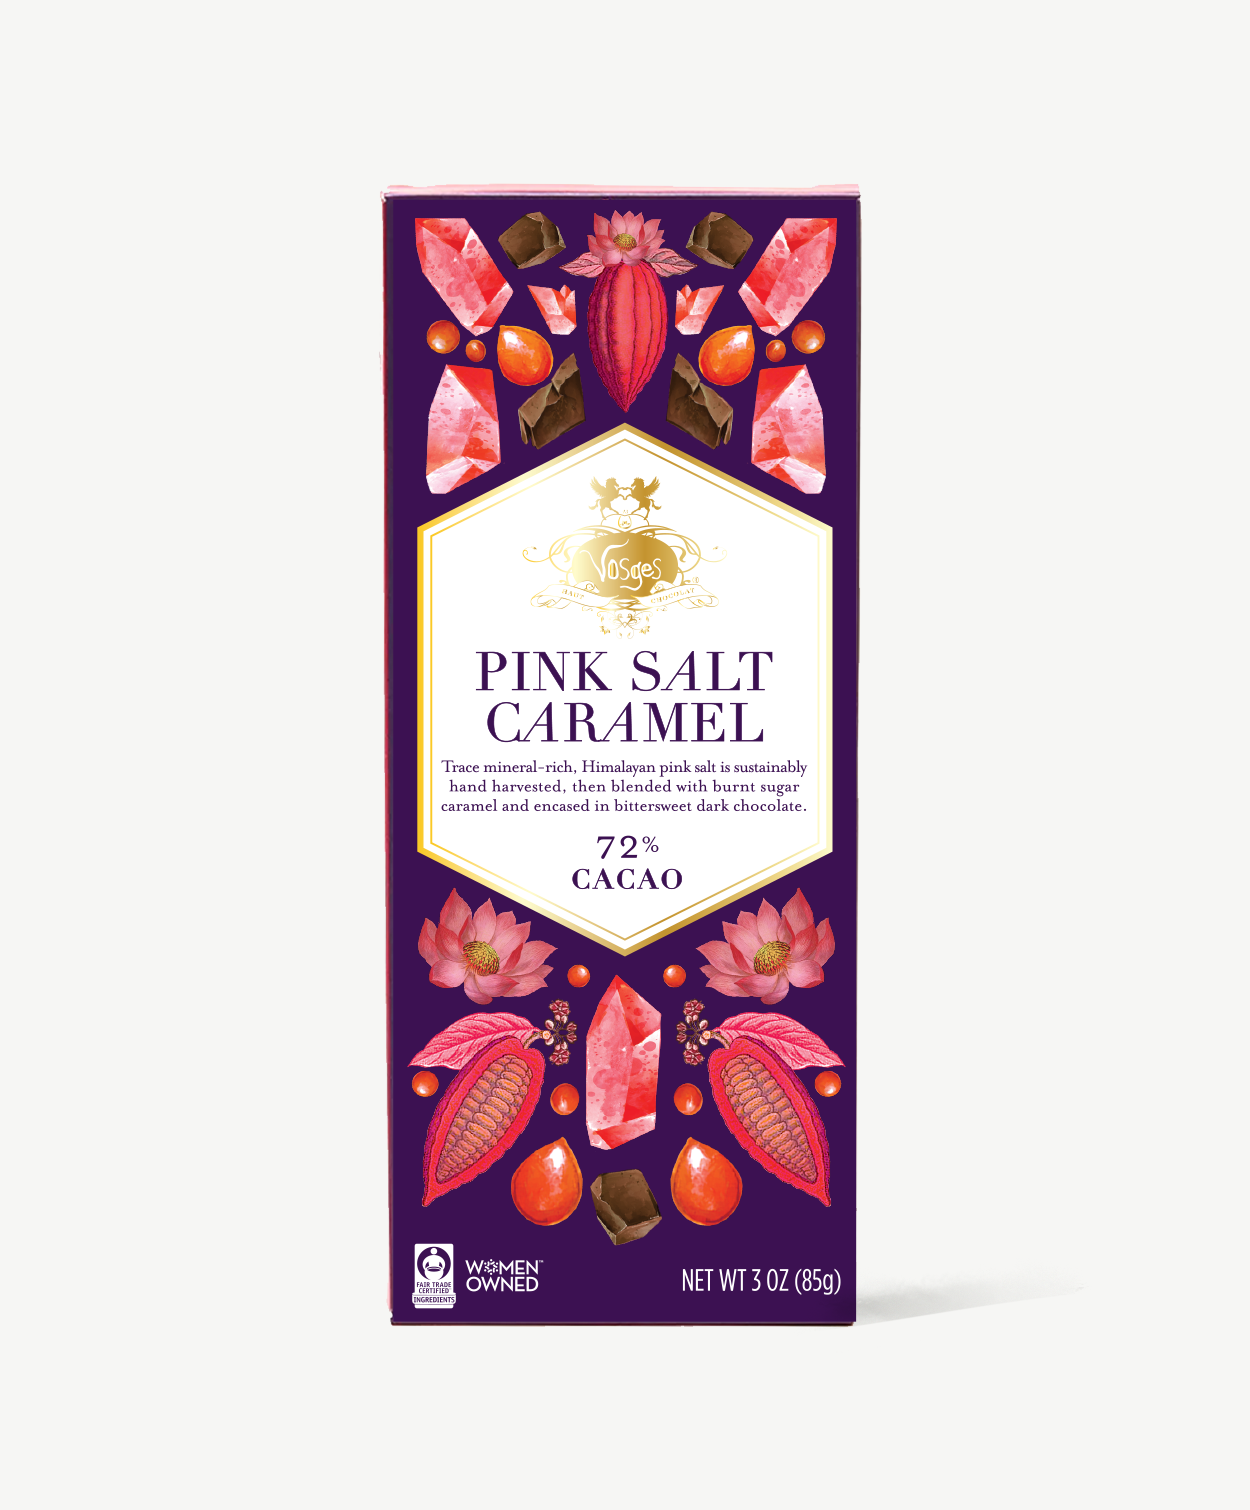 Vosges Pink Salt Caramel bar in box displaying colorful illustrations of pink salt crystals and cacao pods on a white background.